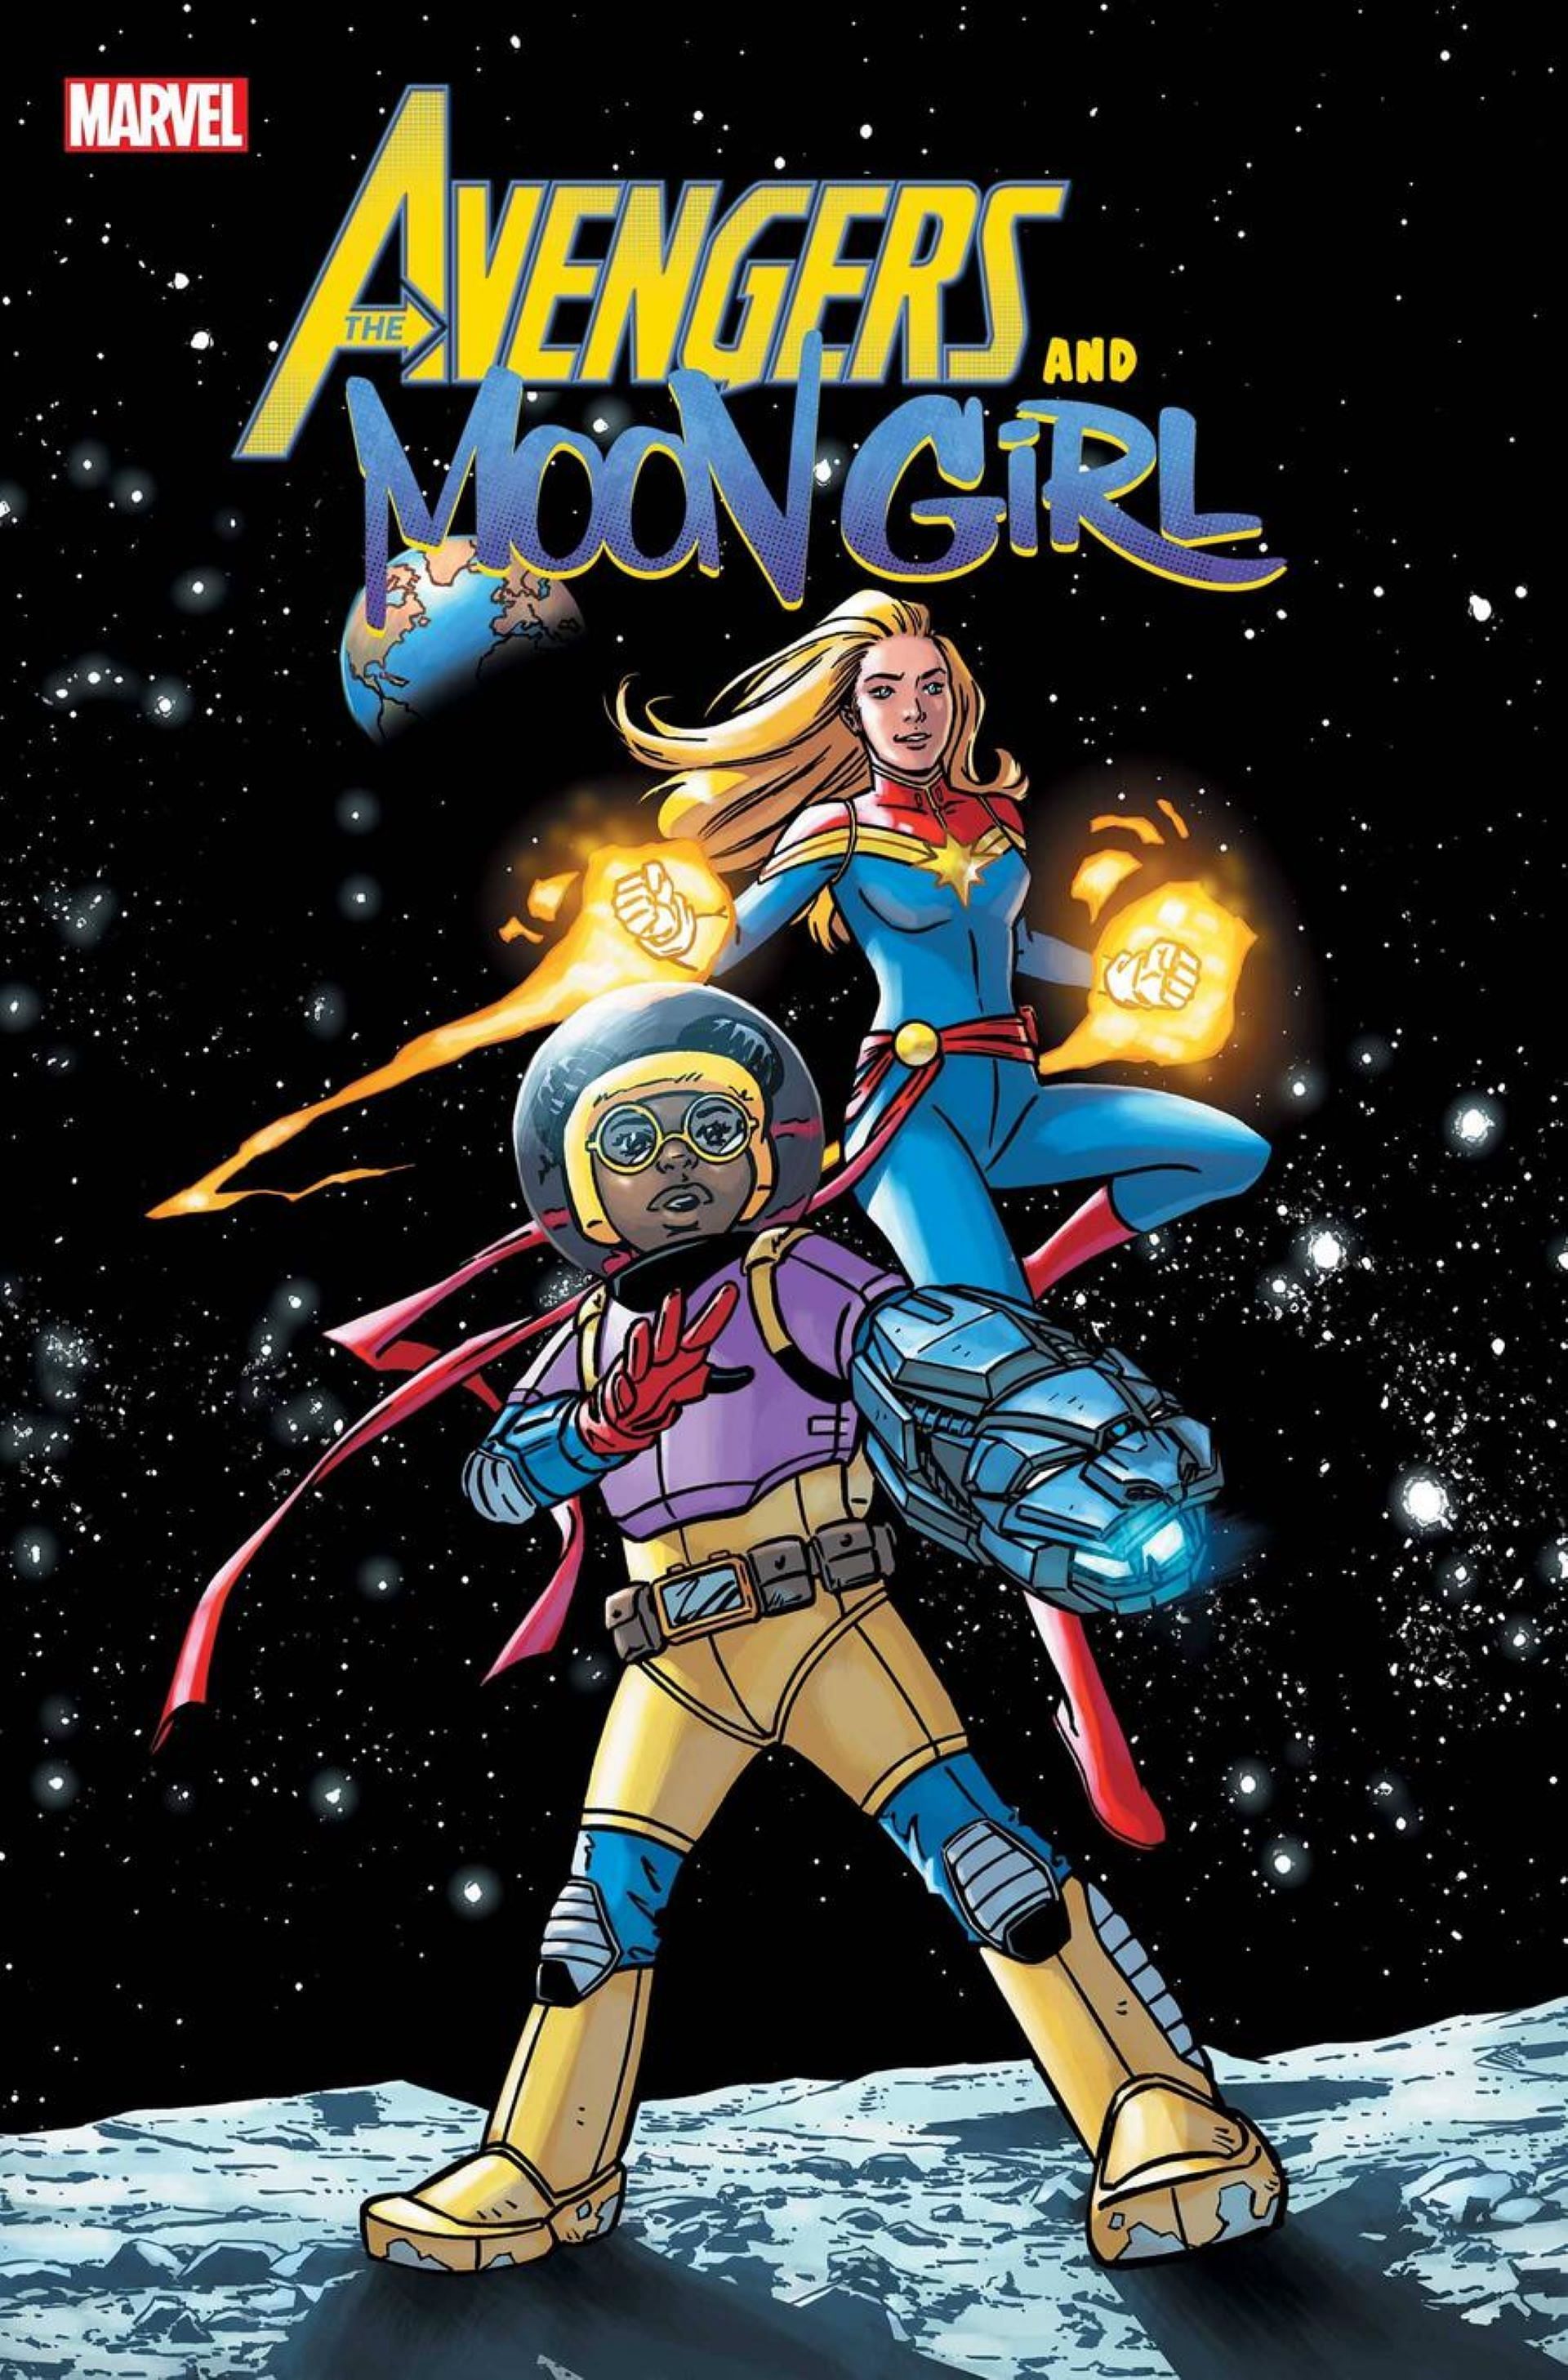 Moon Girl will protect the Earth with the other mighty Avengers (Image via Marvel)